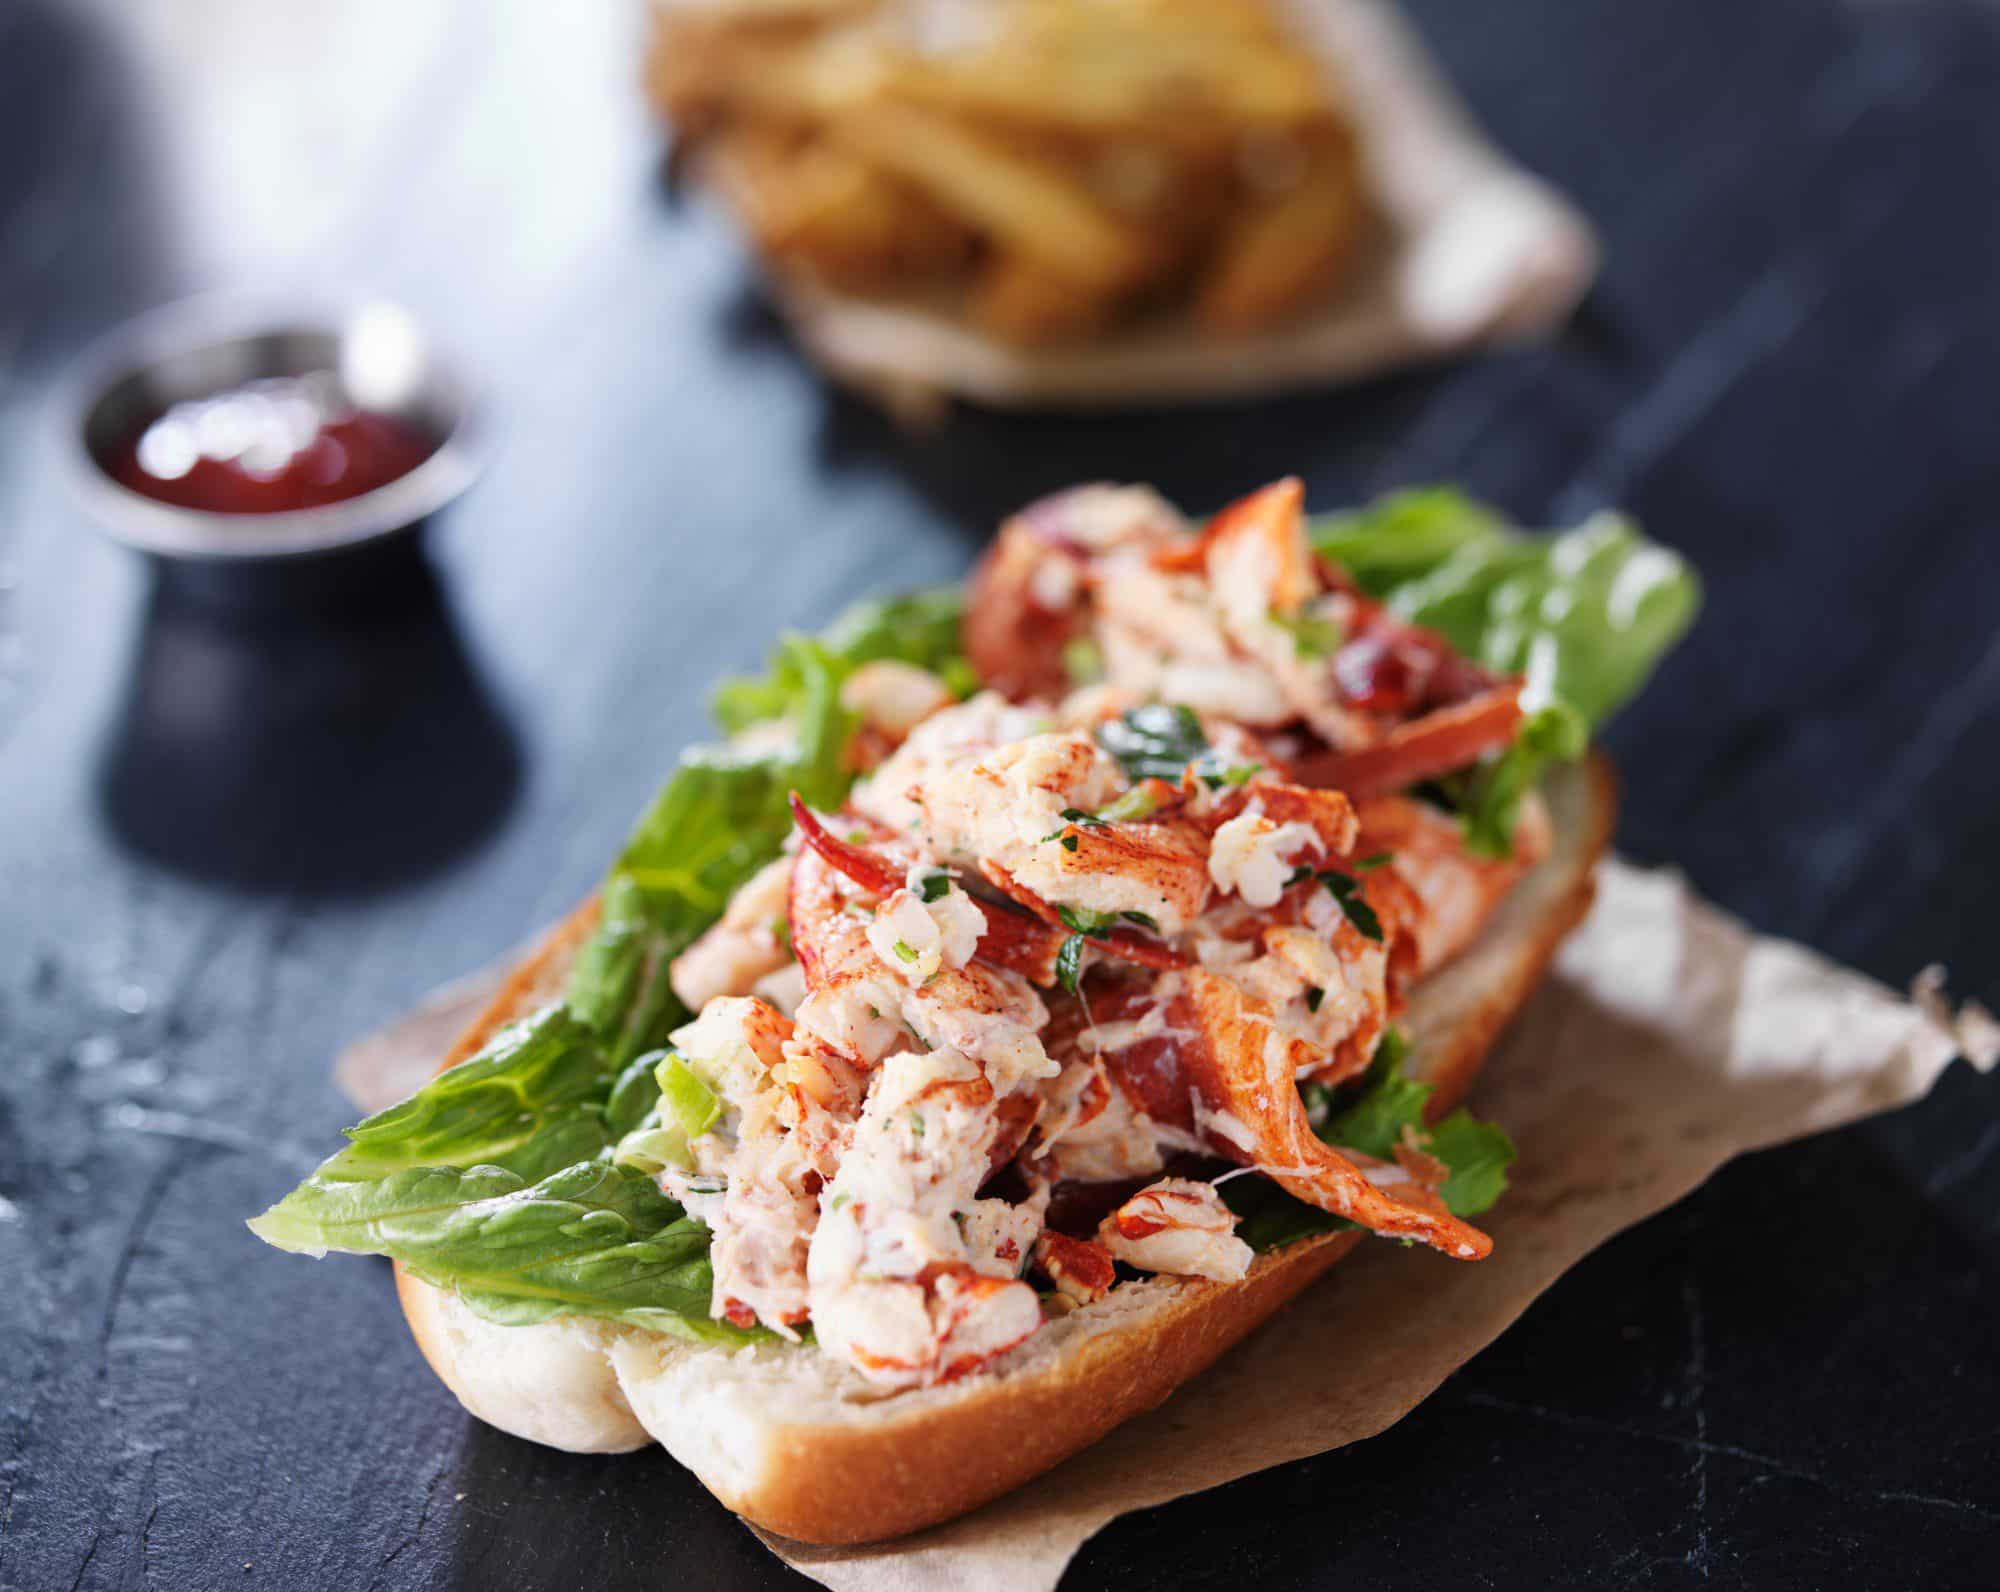 Maine Lobster Meat 101: Everything You Need to Know